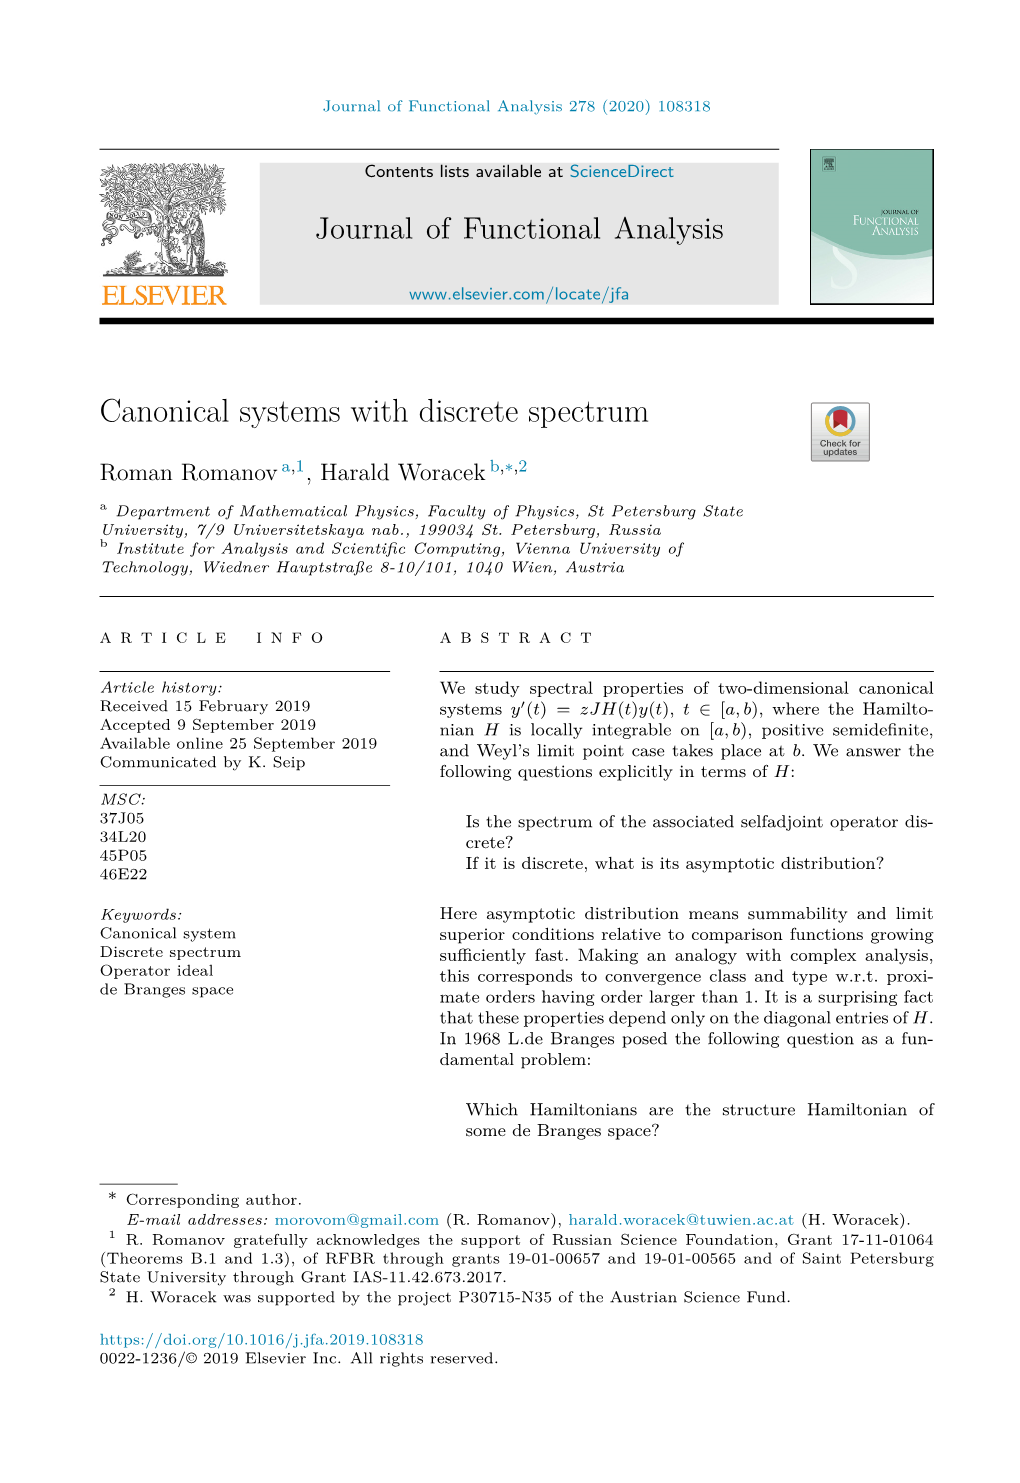 Canonical Systems with Discrete Spectrum